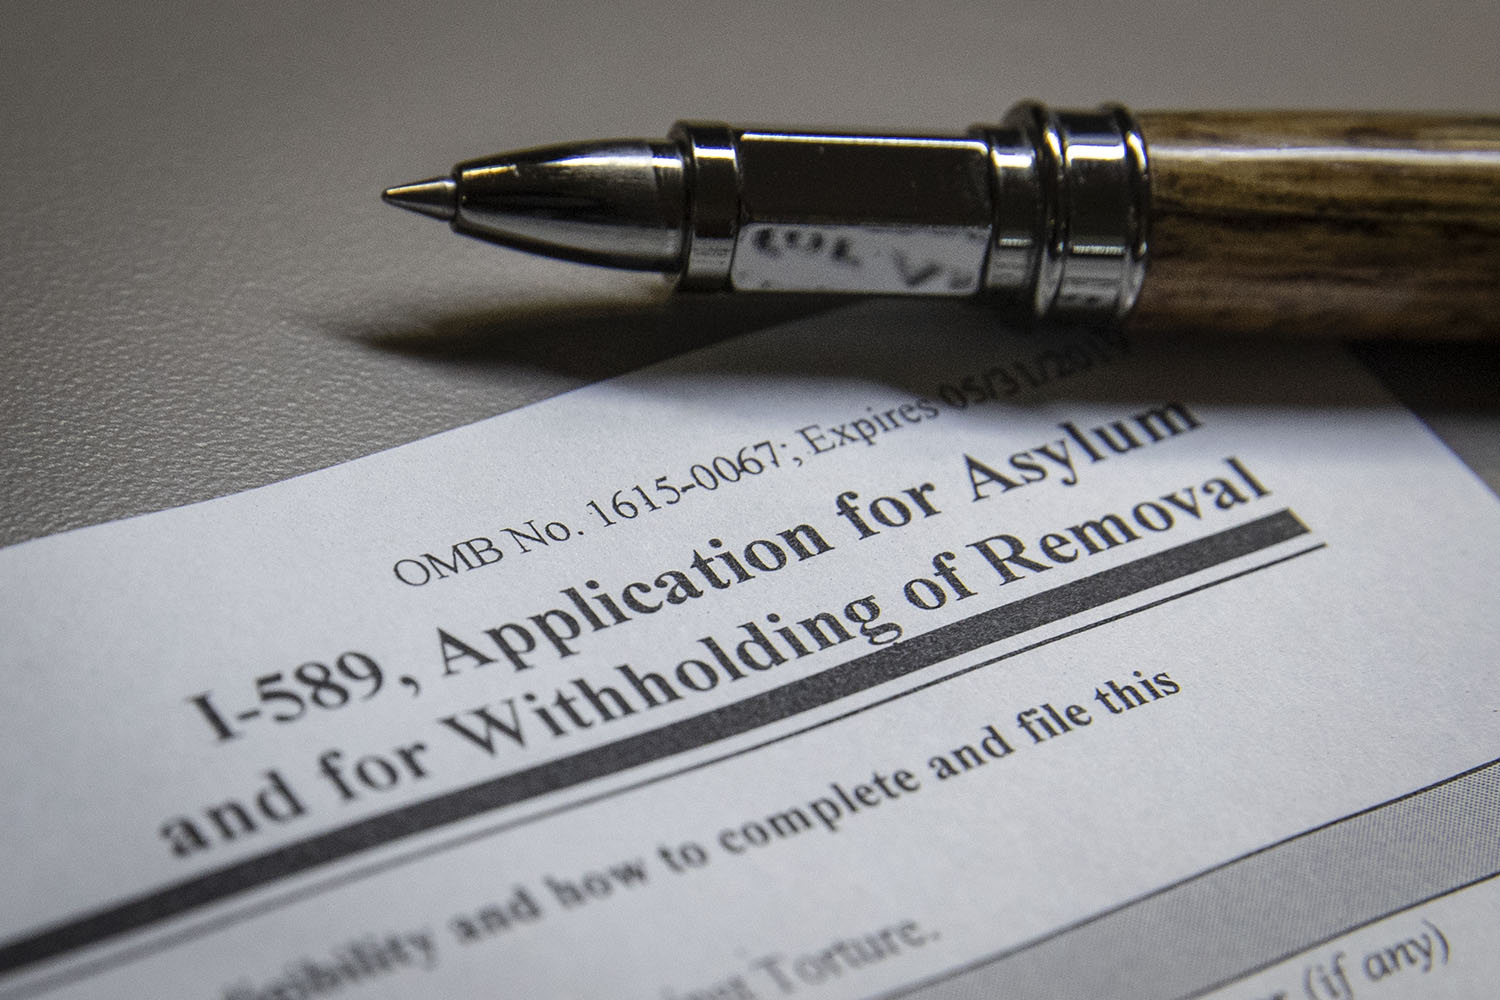 up close view of the form and pen. The form reads: I-589, Application for Asylum and for Withholding of Removal